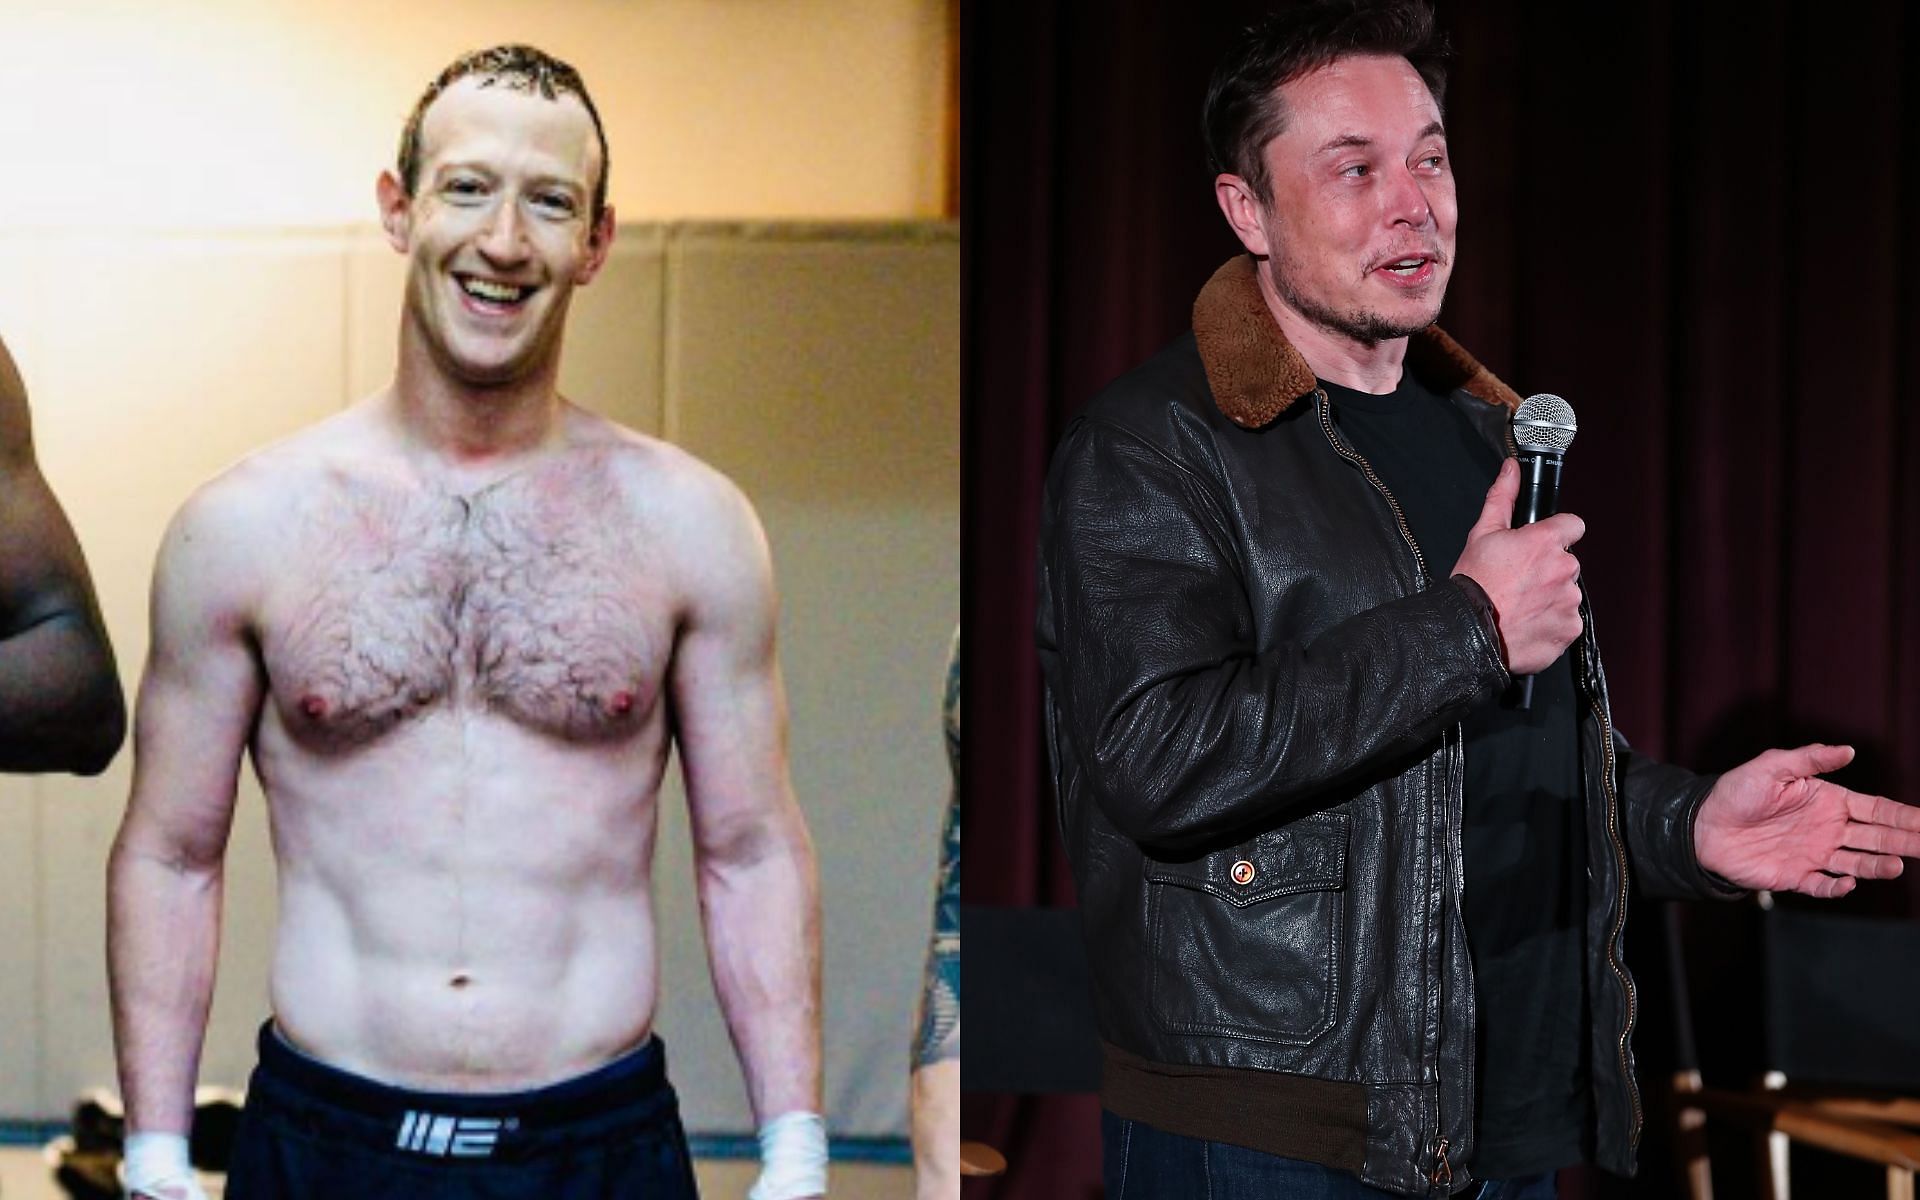 Mark Zuckerberg (left) and Elon Musk (right) (Image credits Getty Images and @zuck on Instagram)